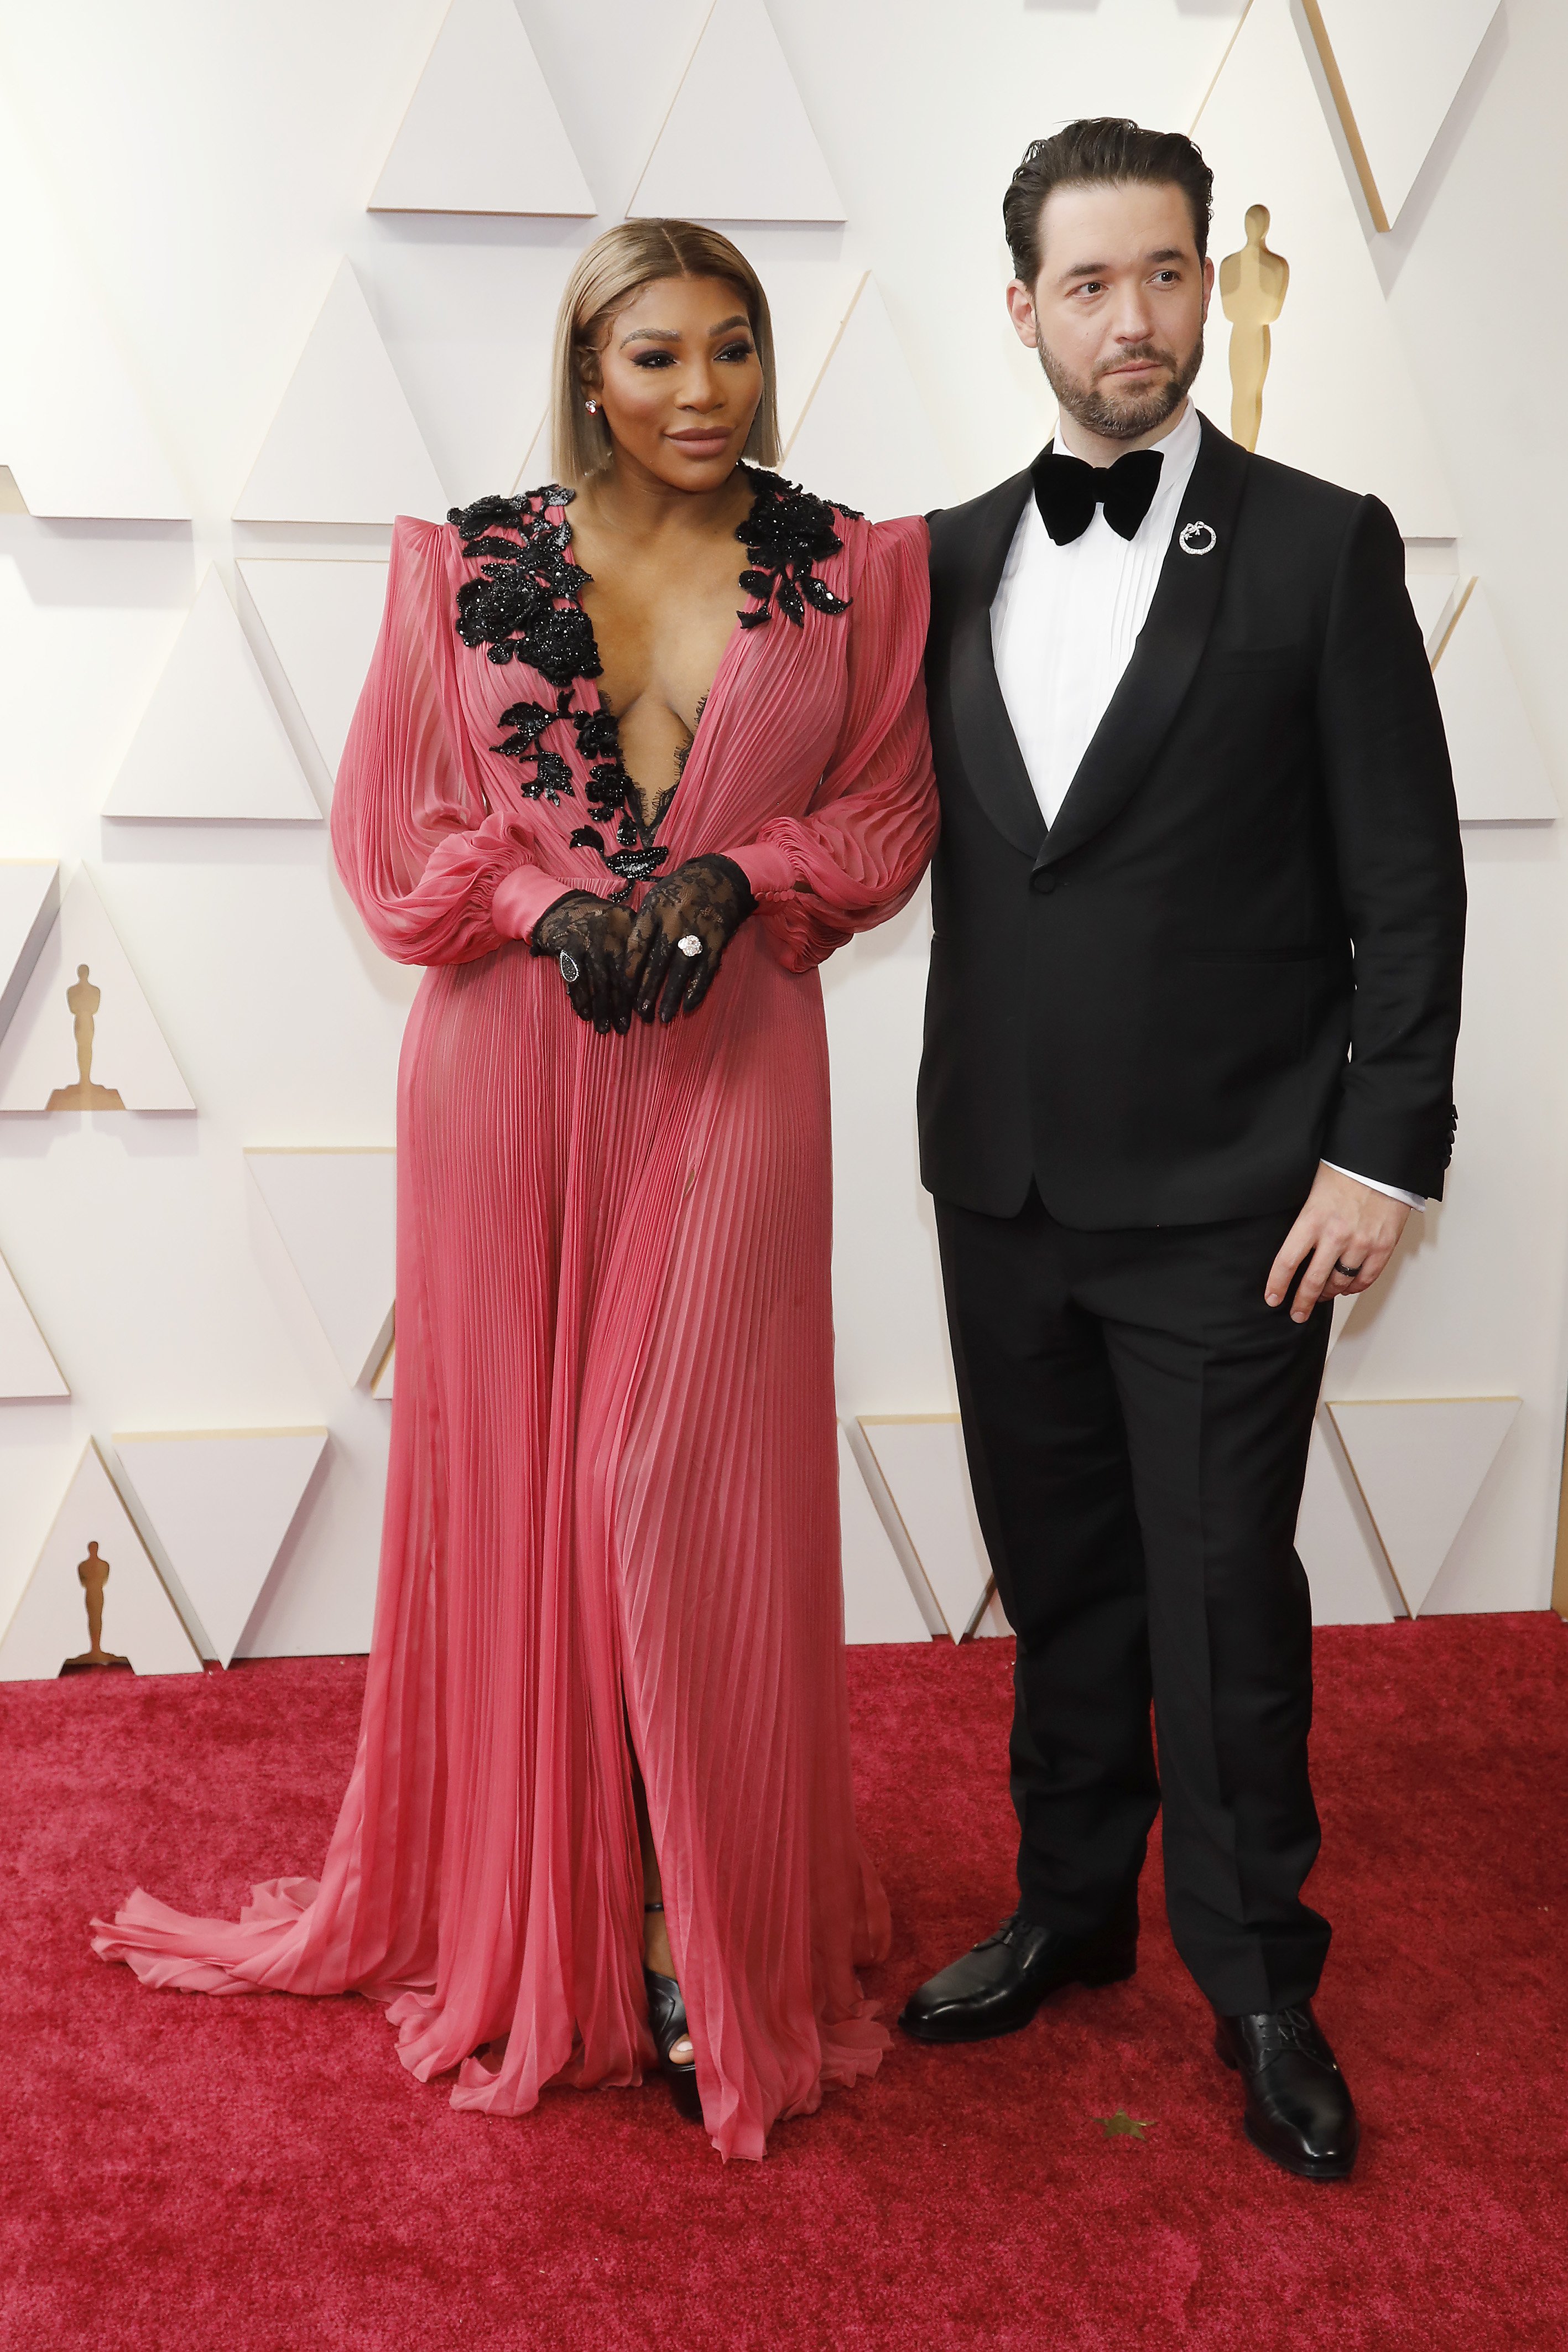 Serena Williams and Alexis Ohanian at the 94th Academy Awards in Los Angeles, on March 28, 2022 | Source: Getty Images